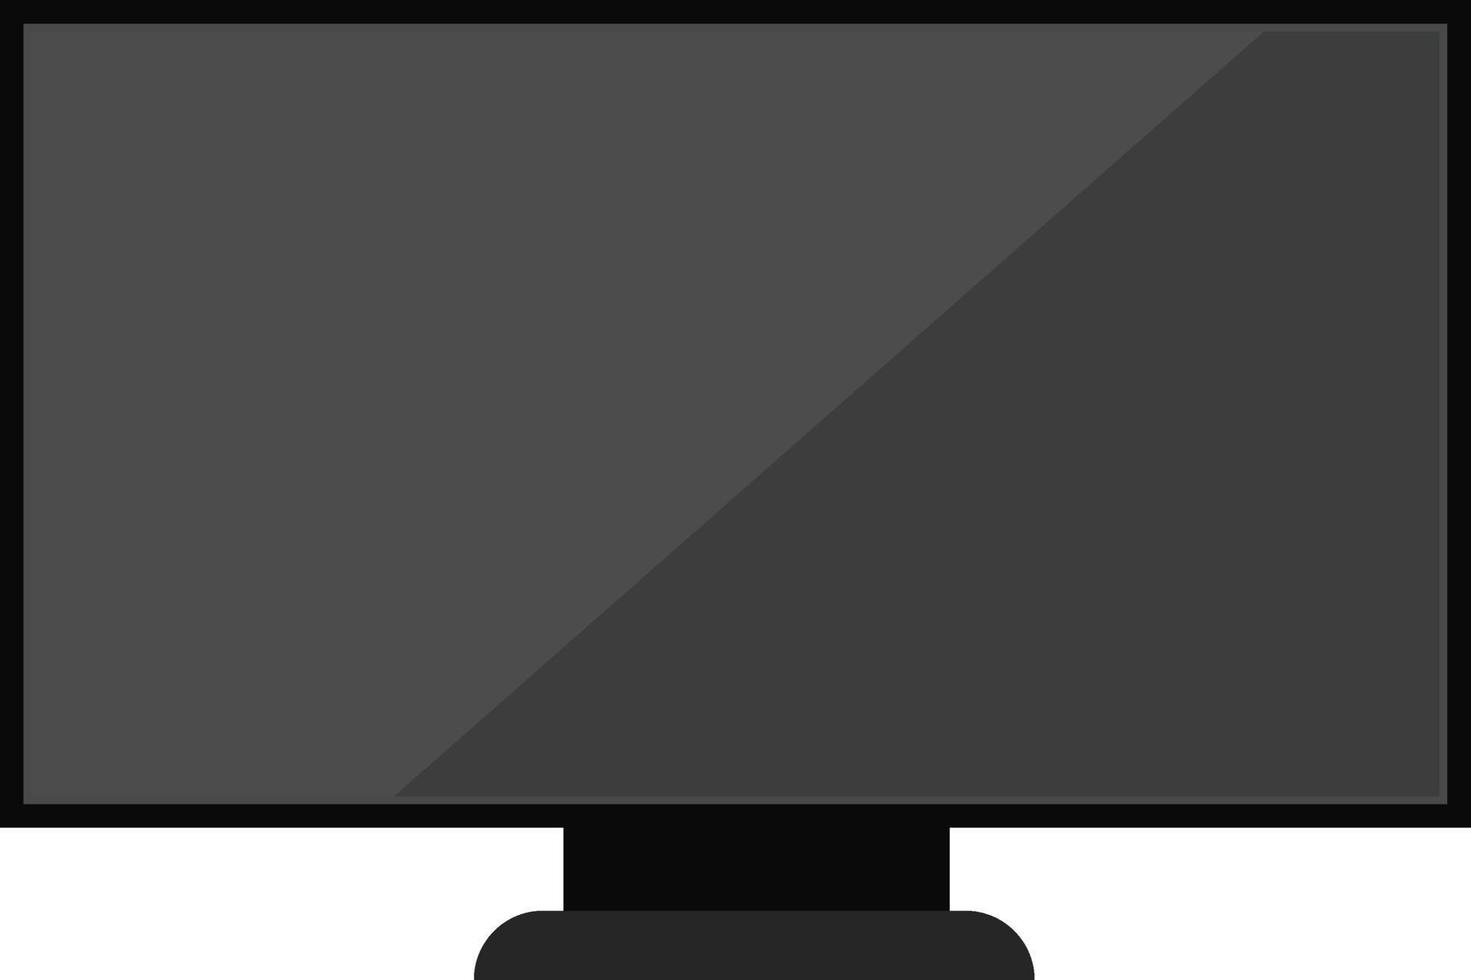 LCD TV, illustration, vector on a white background.